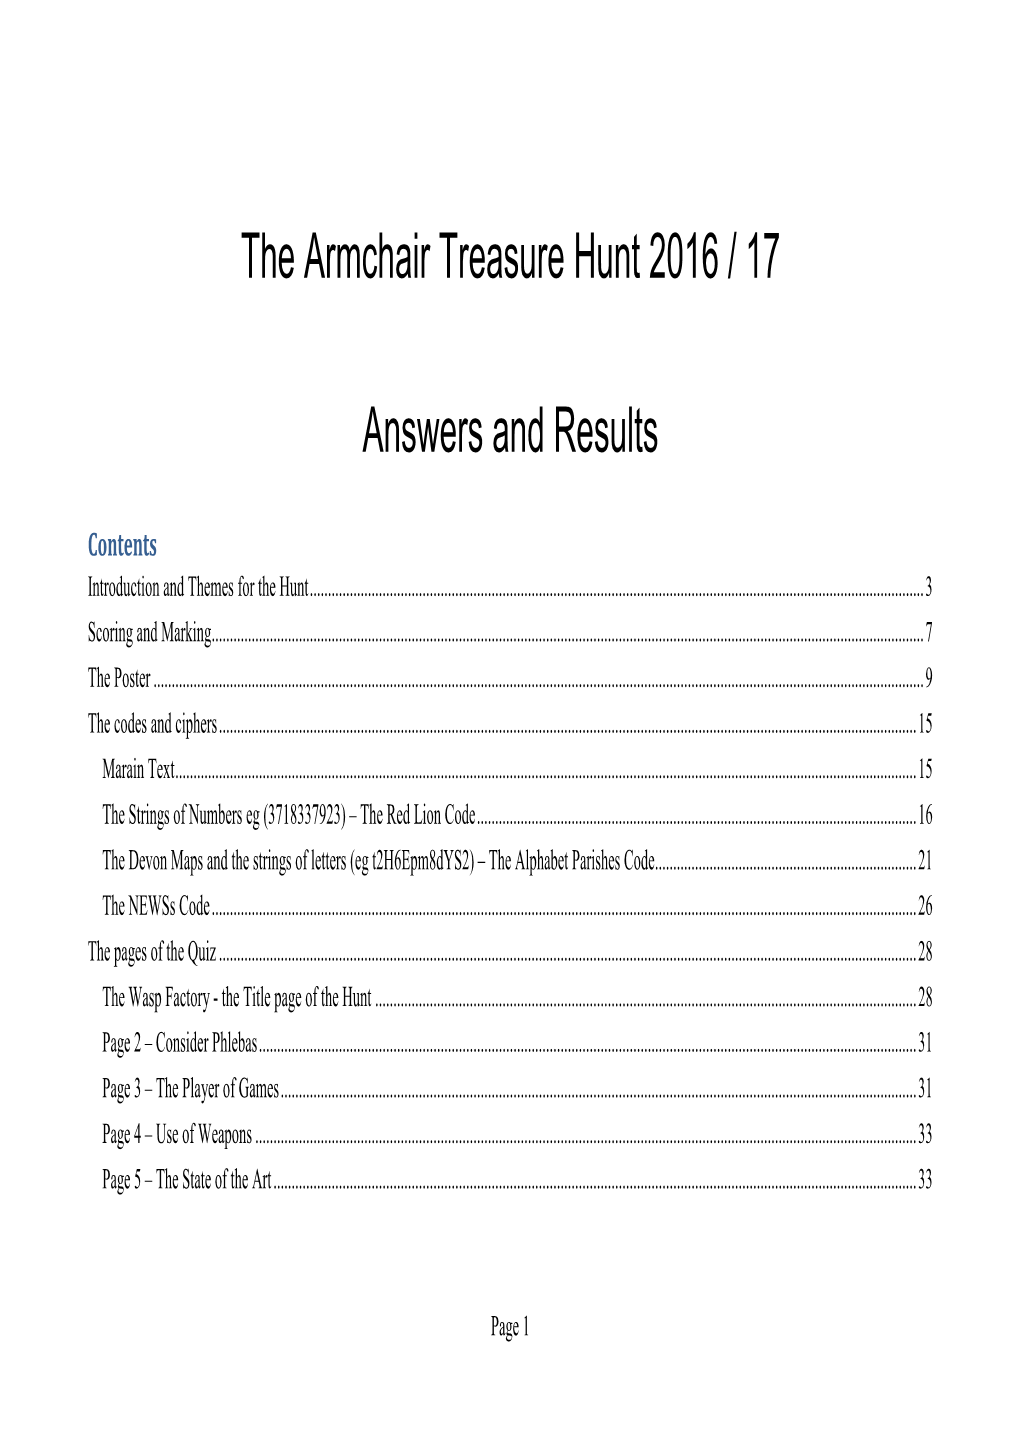 The Armchair Treasure Hunt 2016 / 17 Answers and Results